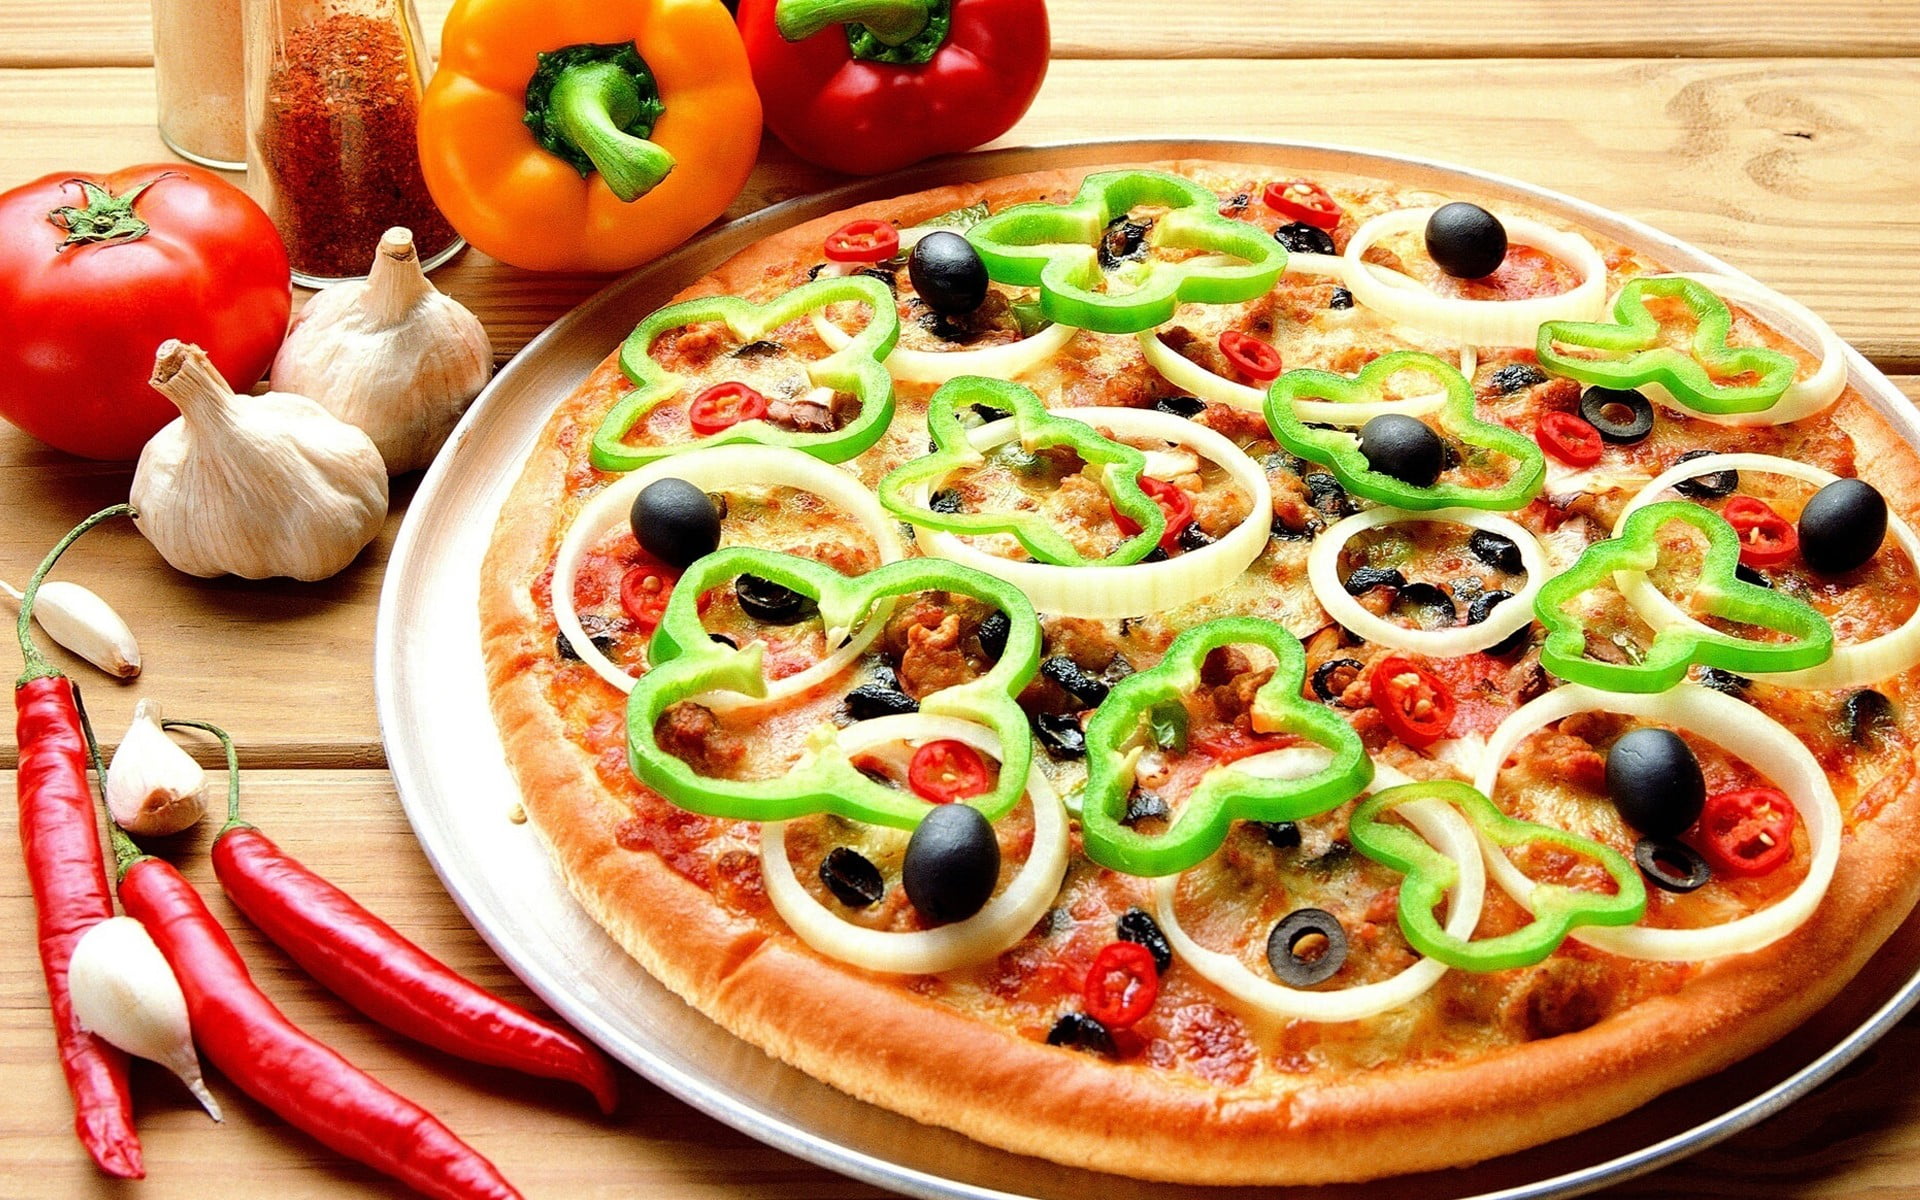 pizza, vegetables, food, tomatoes, peppers, chilli peppers